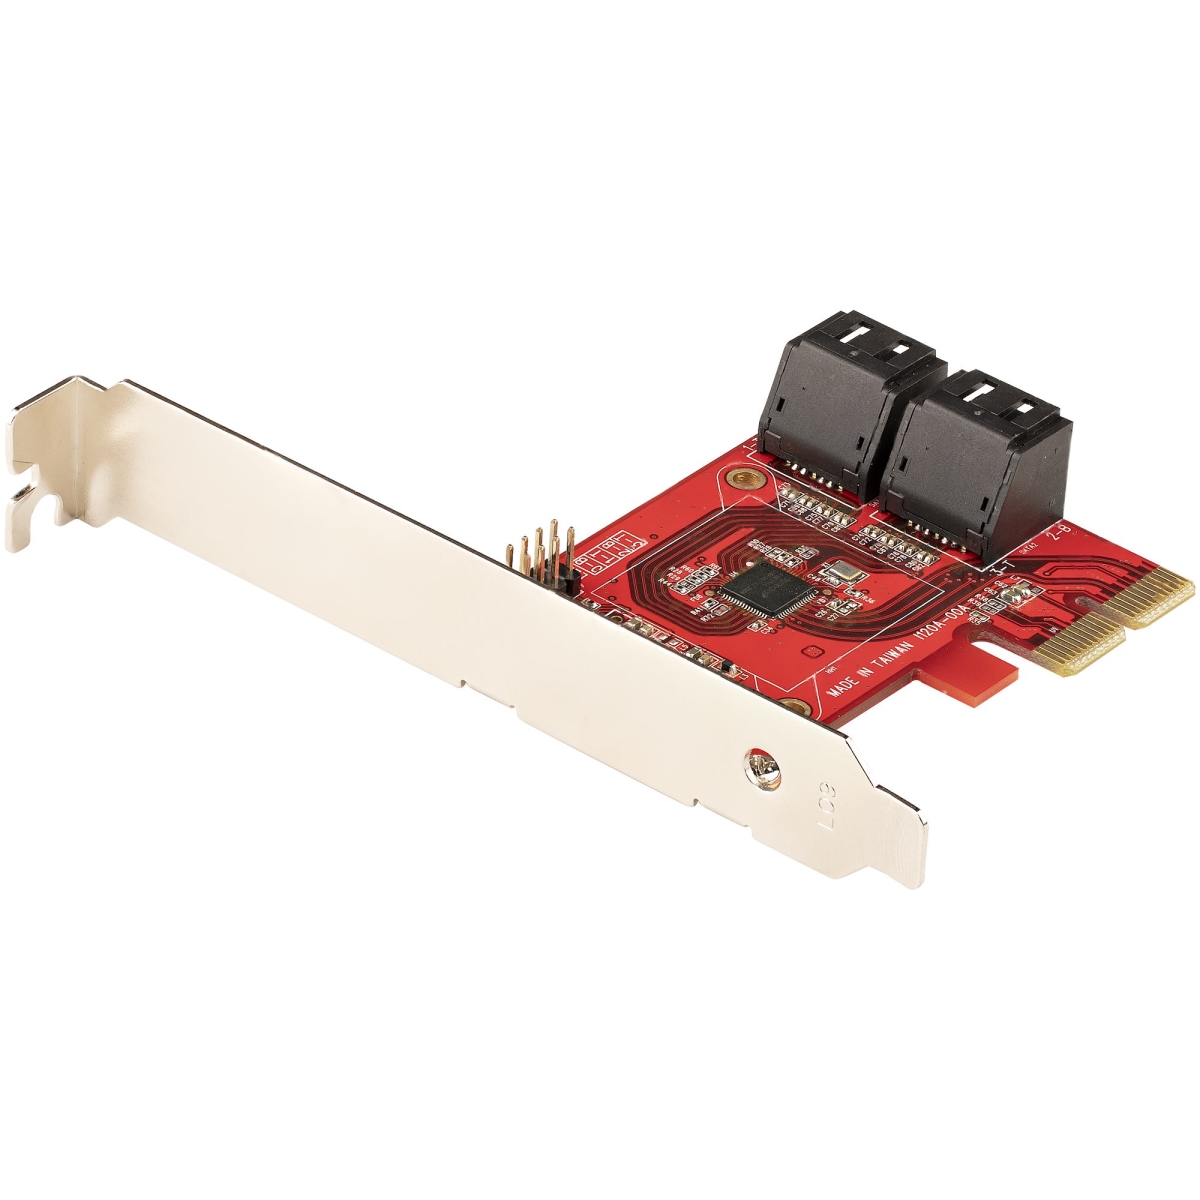 Picture of Startech 4P6G-PCIE-SATA-CARD Sata III 6Gbps Pcie 3.0 X2 Card - Sata Expansion Adapter Card - 4-Port SATA